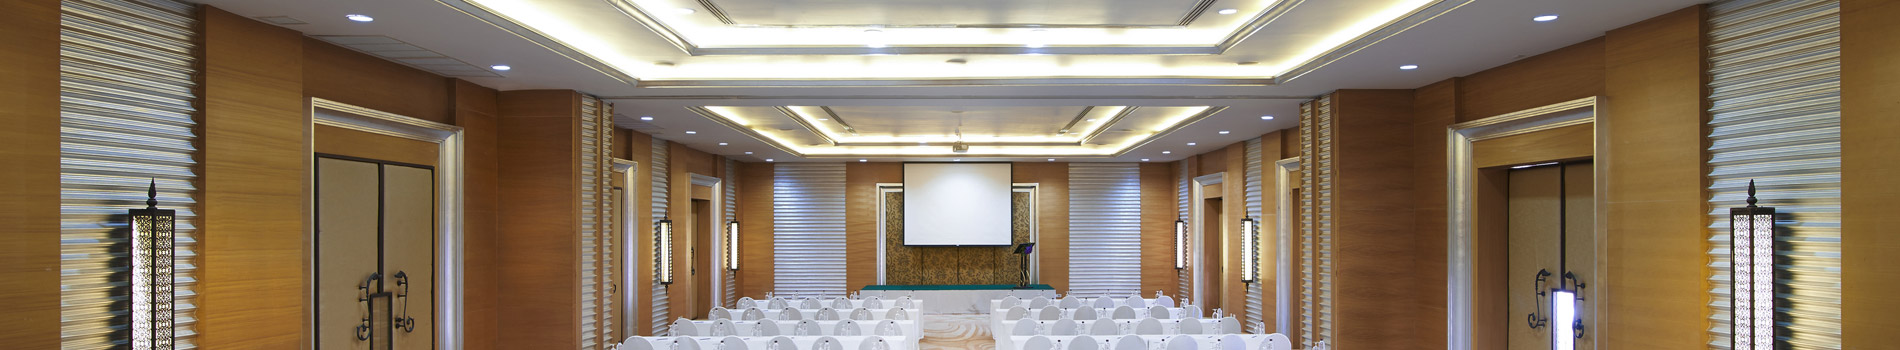 Function Rooms Facilities - 素可泰民俗度假村